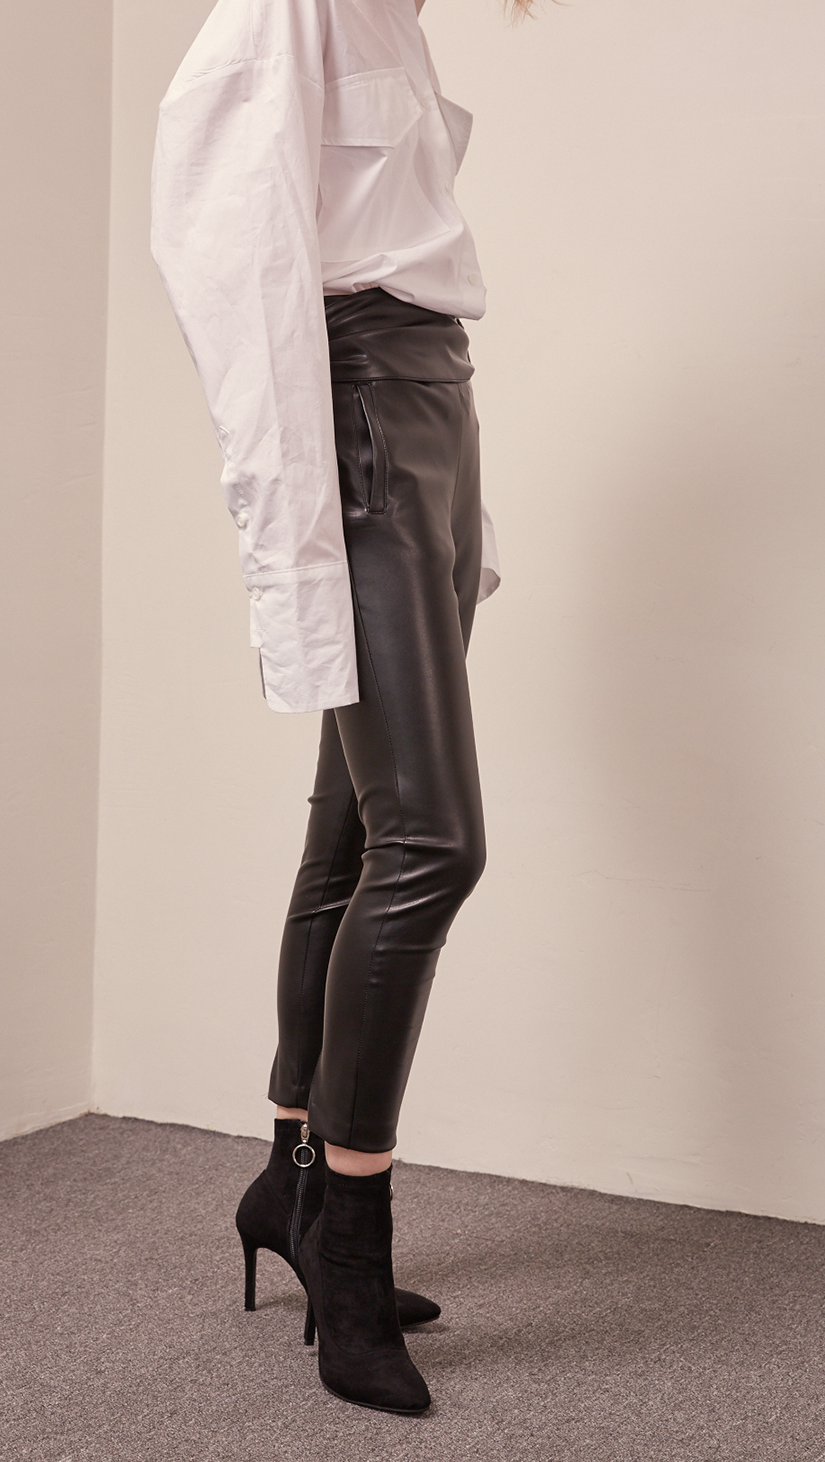 The Gwynn in black stretchy leather pant. Streamlining shape that ends above the ankles, buckled straps at the front, slant two pockets, zipper closing. Slim fit. Starchy Fabric. 